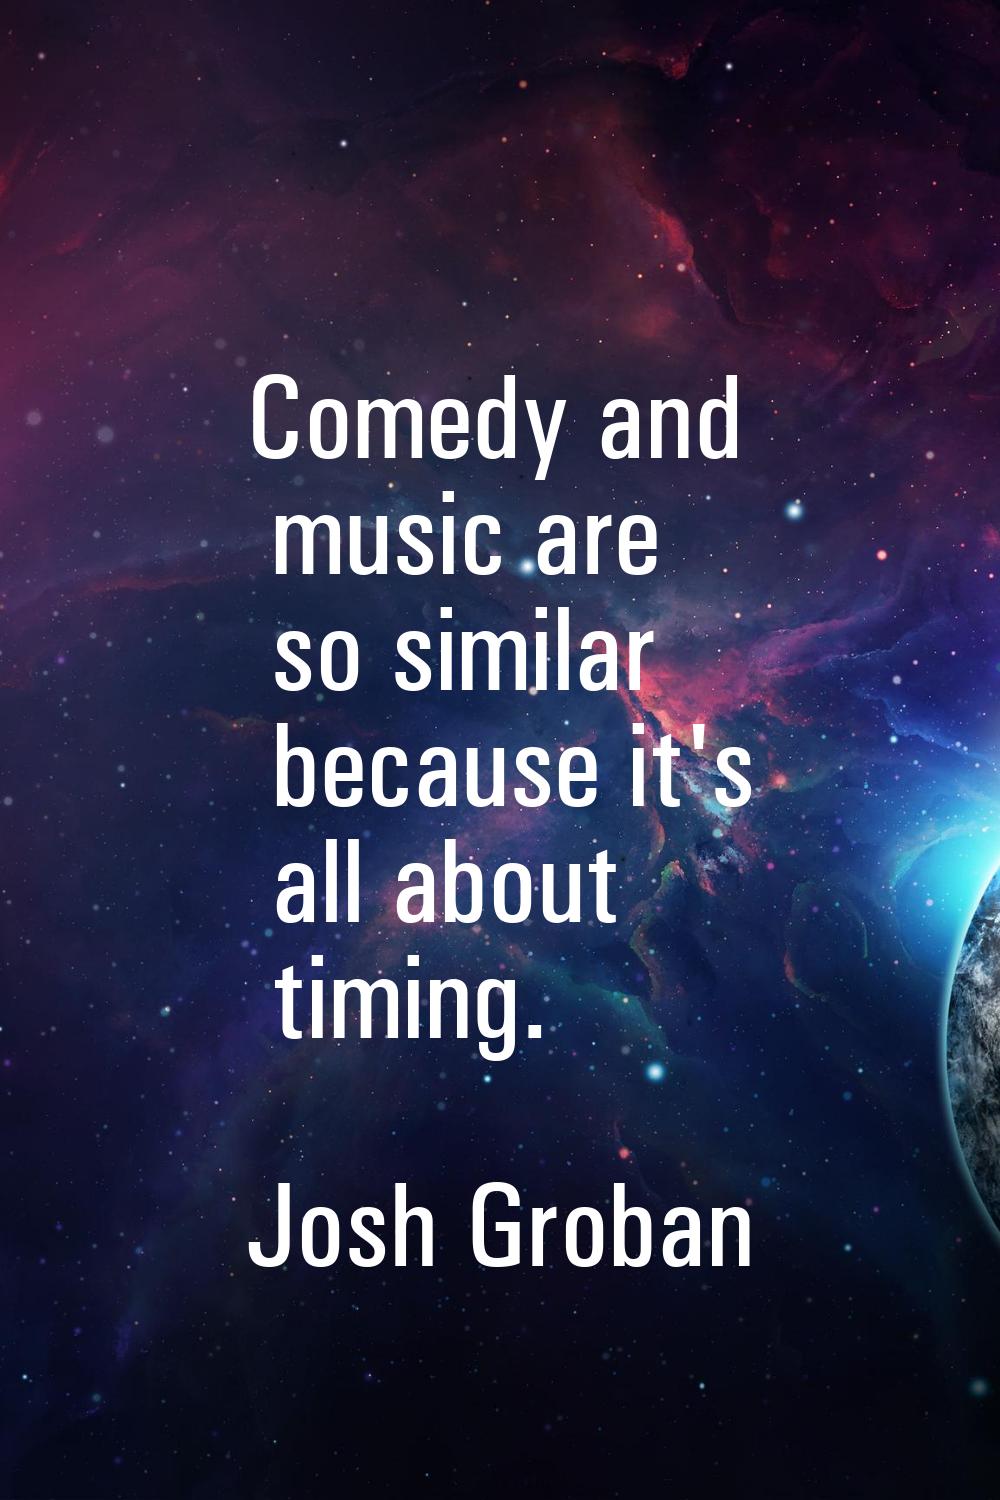 Comedy and music are so similar because it's all about timing.